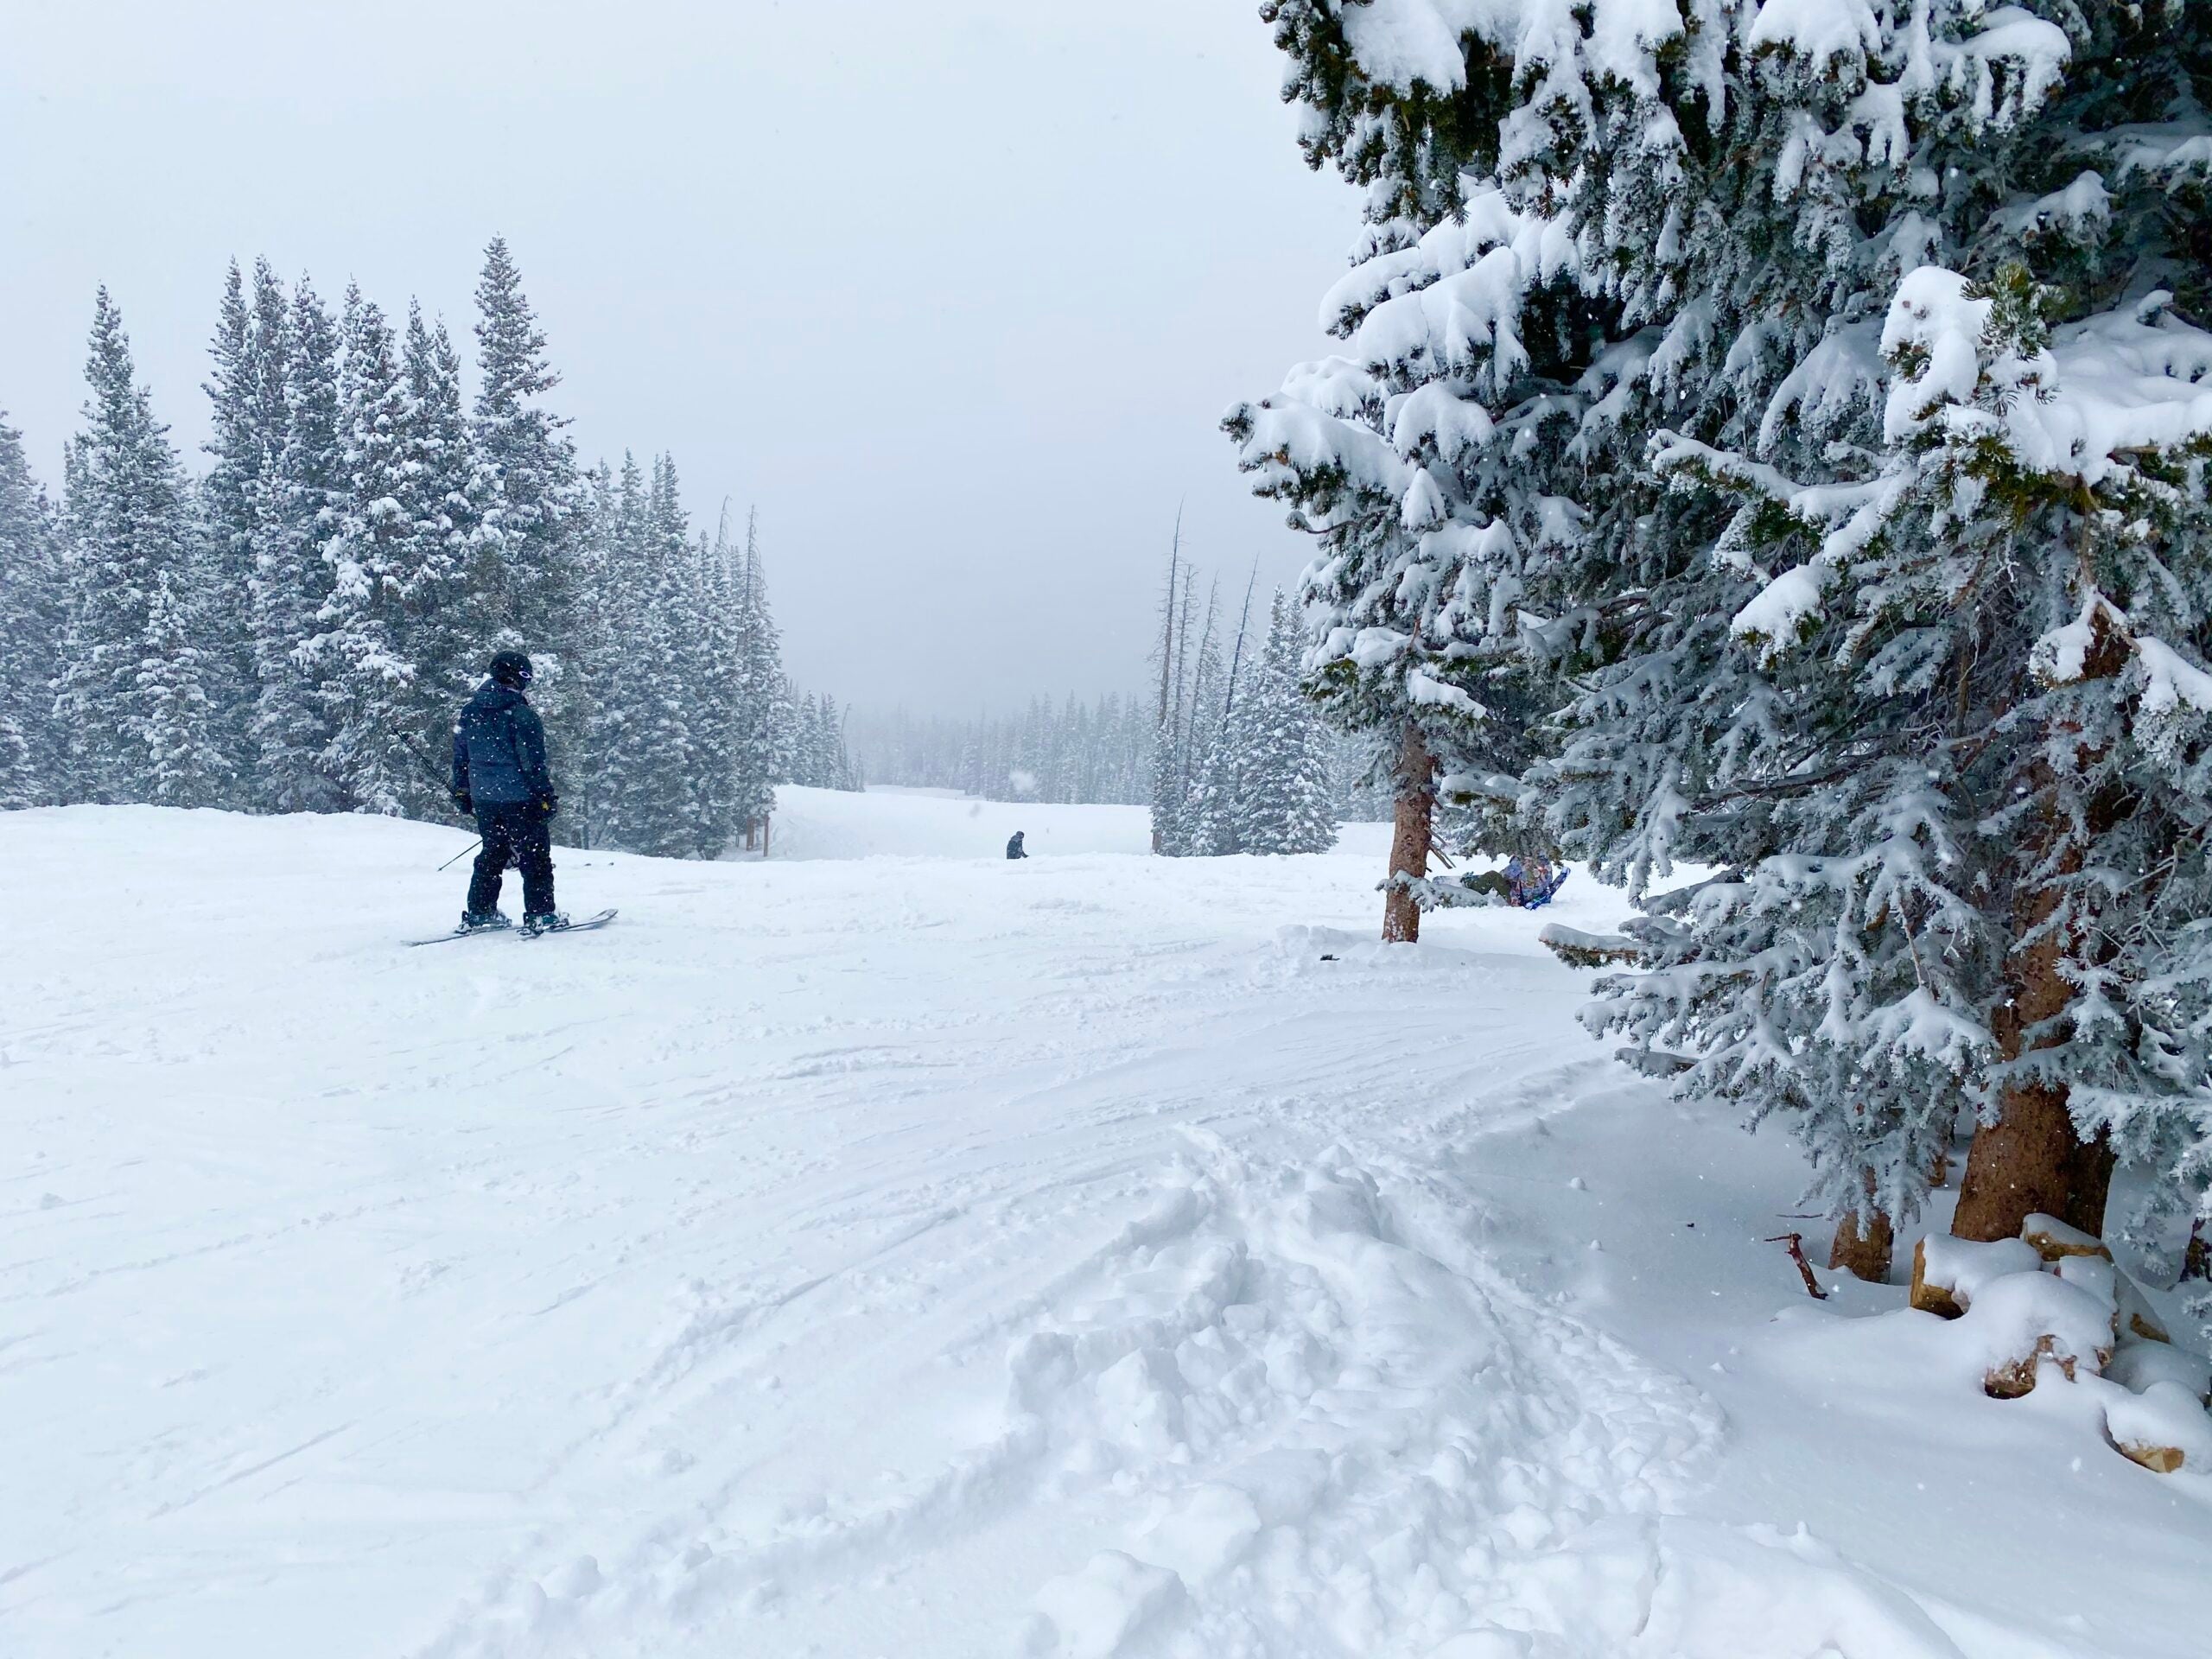 Dec. 3 is last day to buy Epic Pass — purchase now to ski for less this